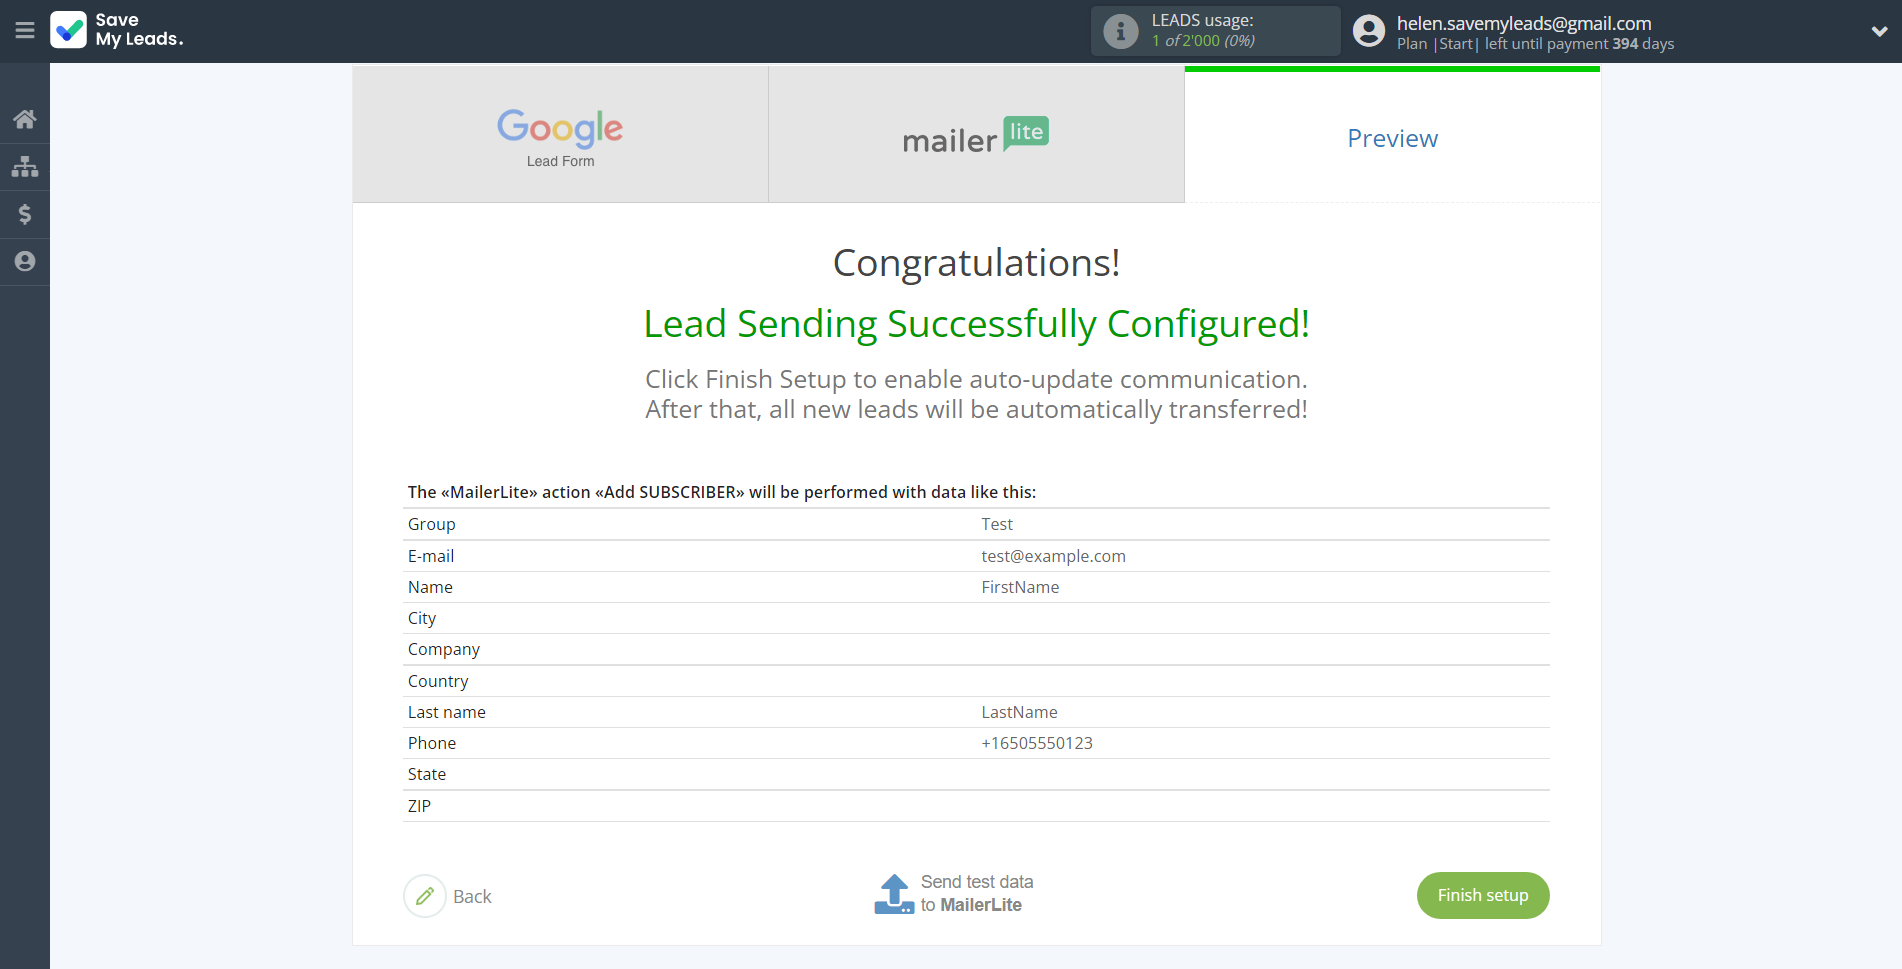 How to Connect Google Lead Form with MailerLite | Test data